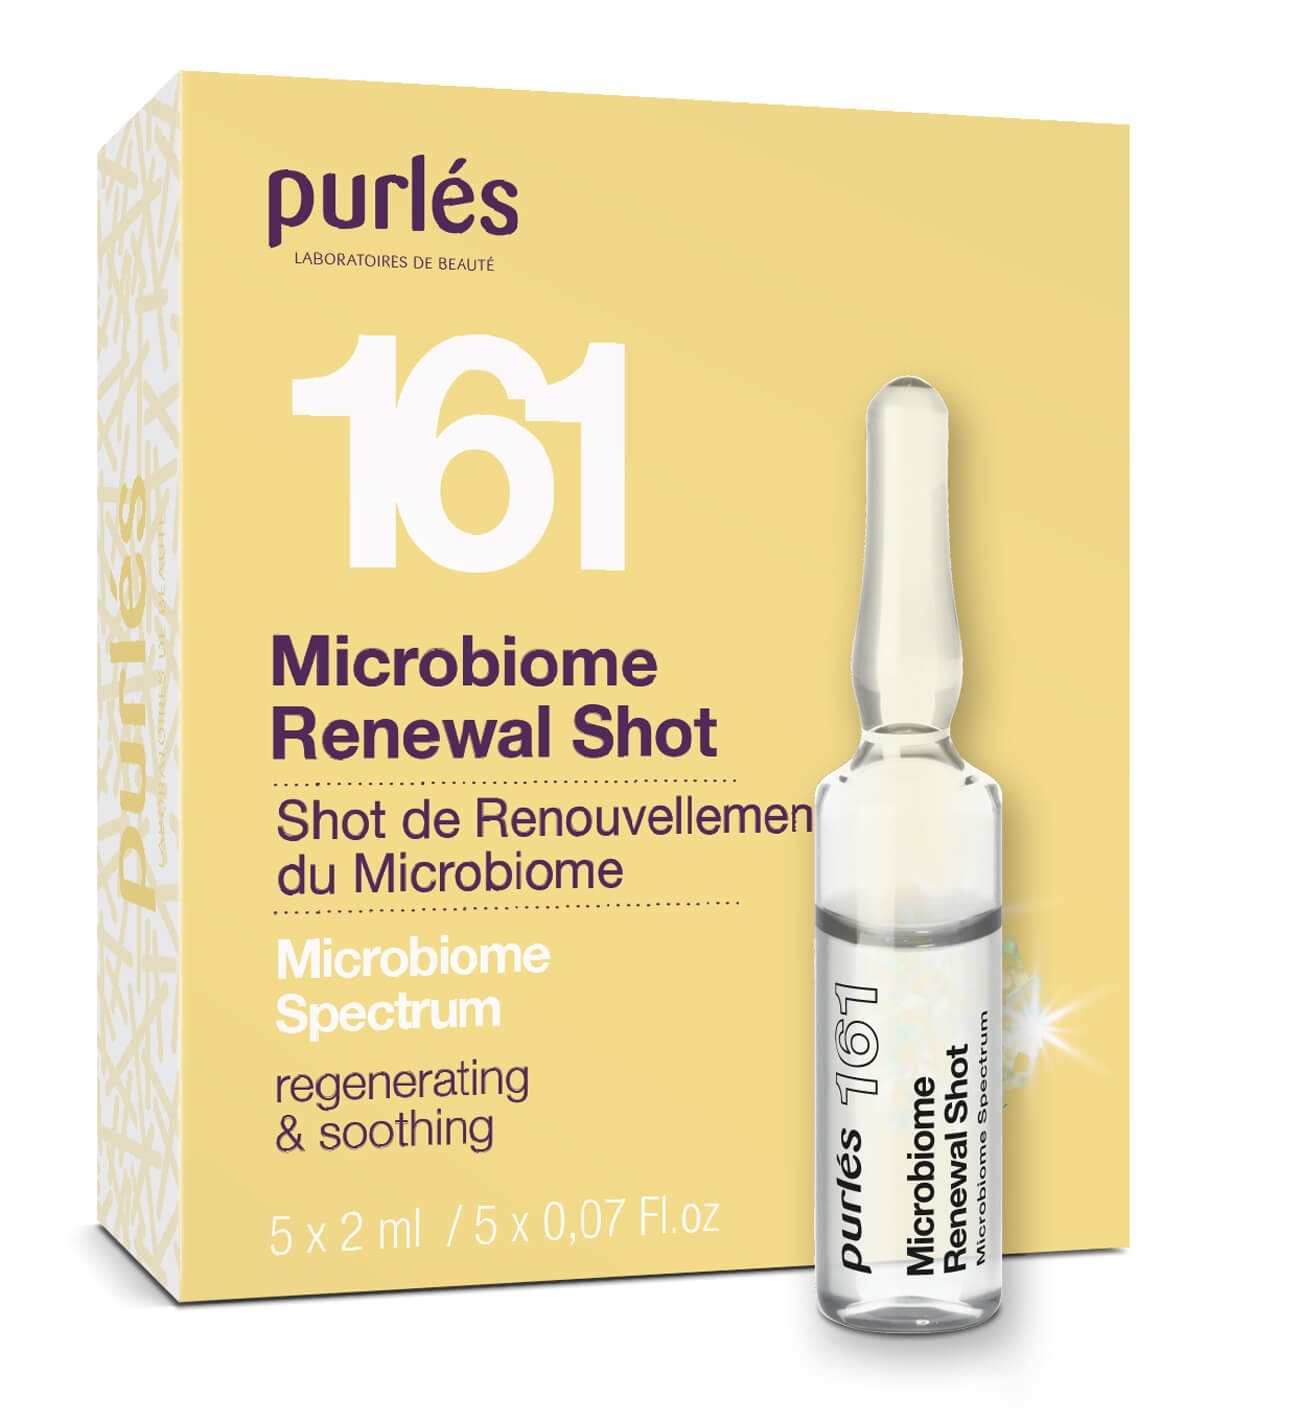 Purles 161 Microbiome Spectrum Microbiome Renewal Shot Regenerating & Soothing Treatment 5x2ml